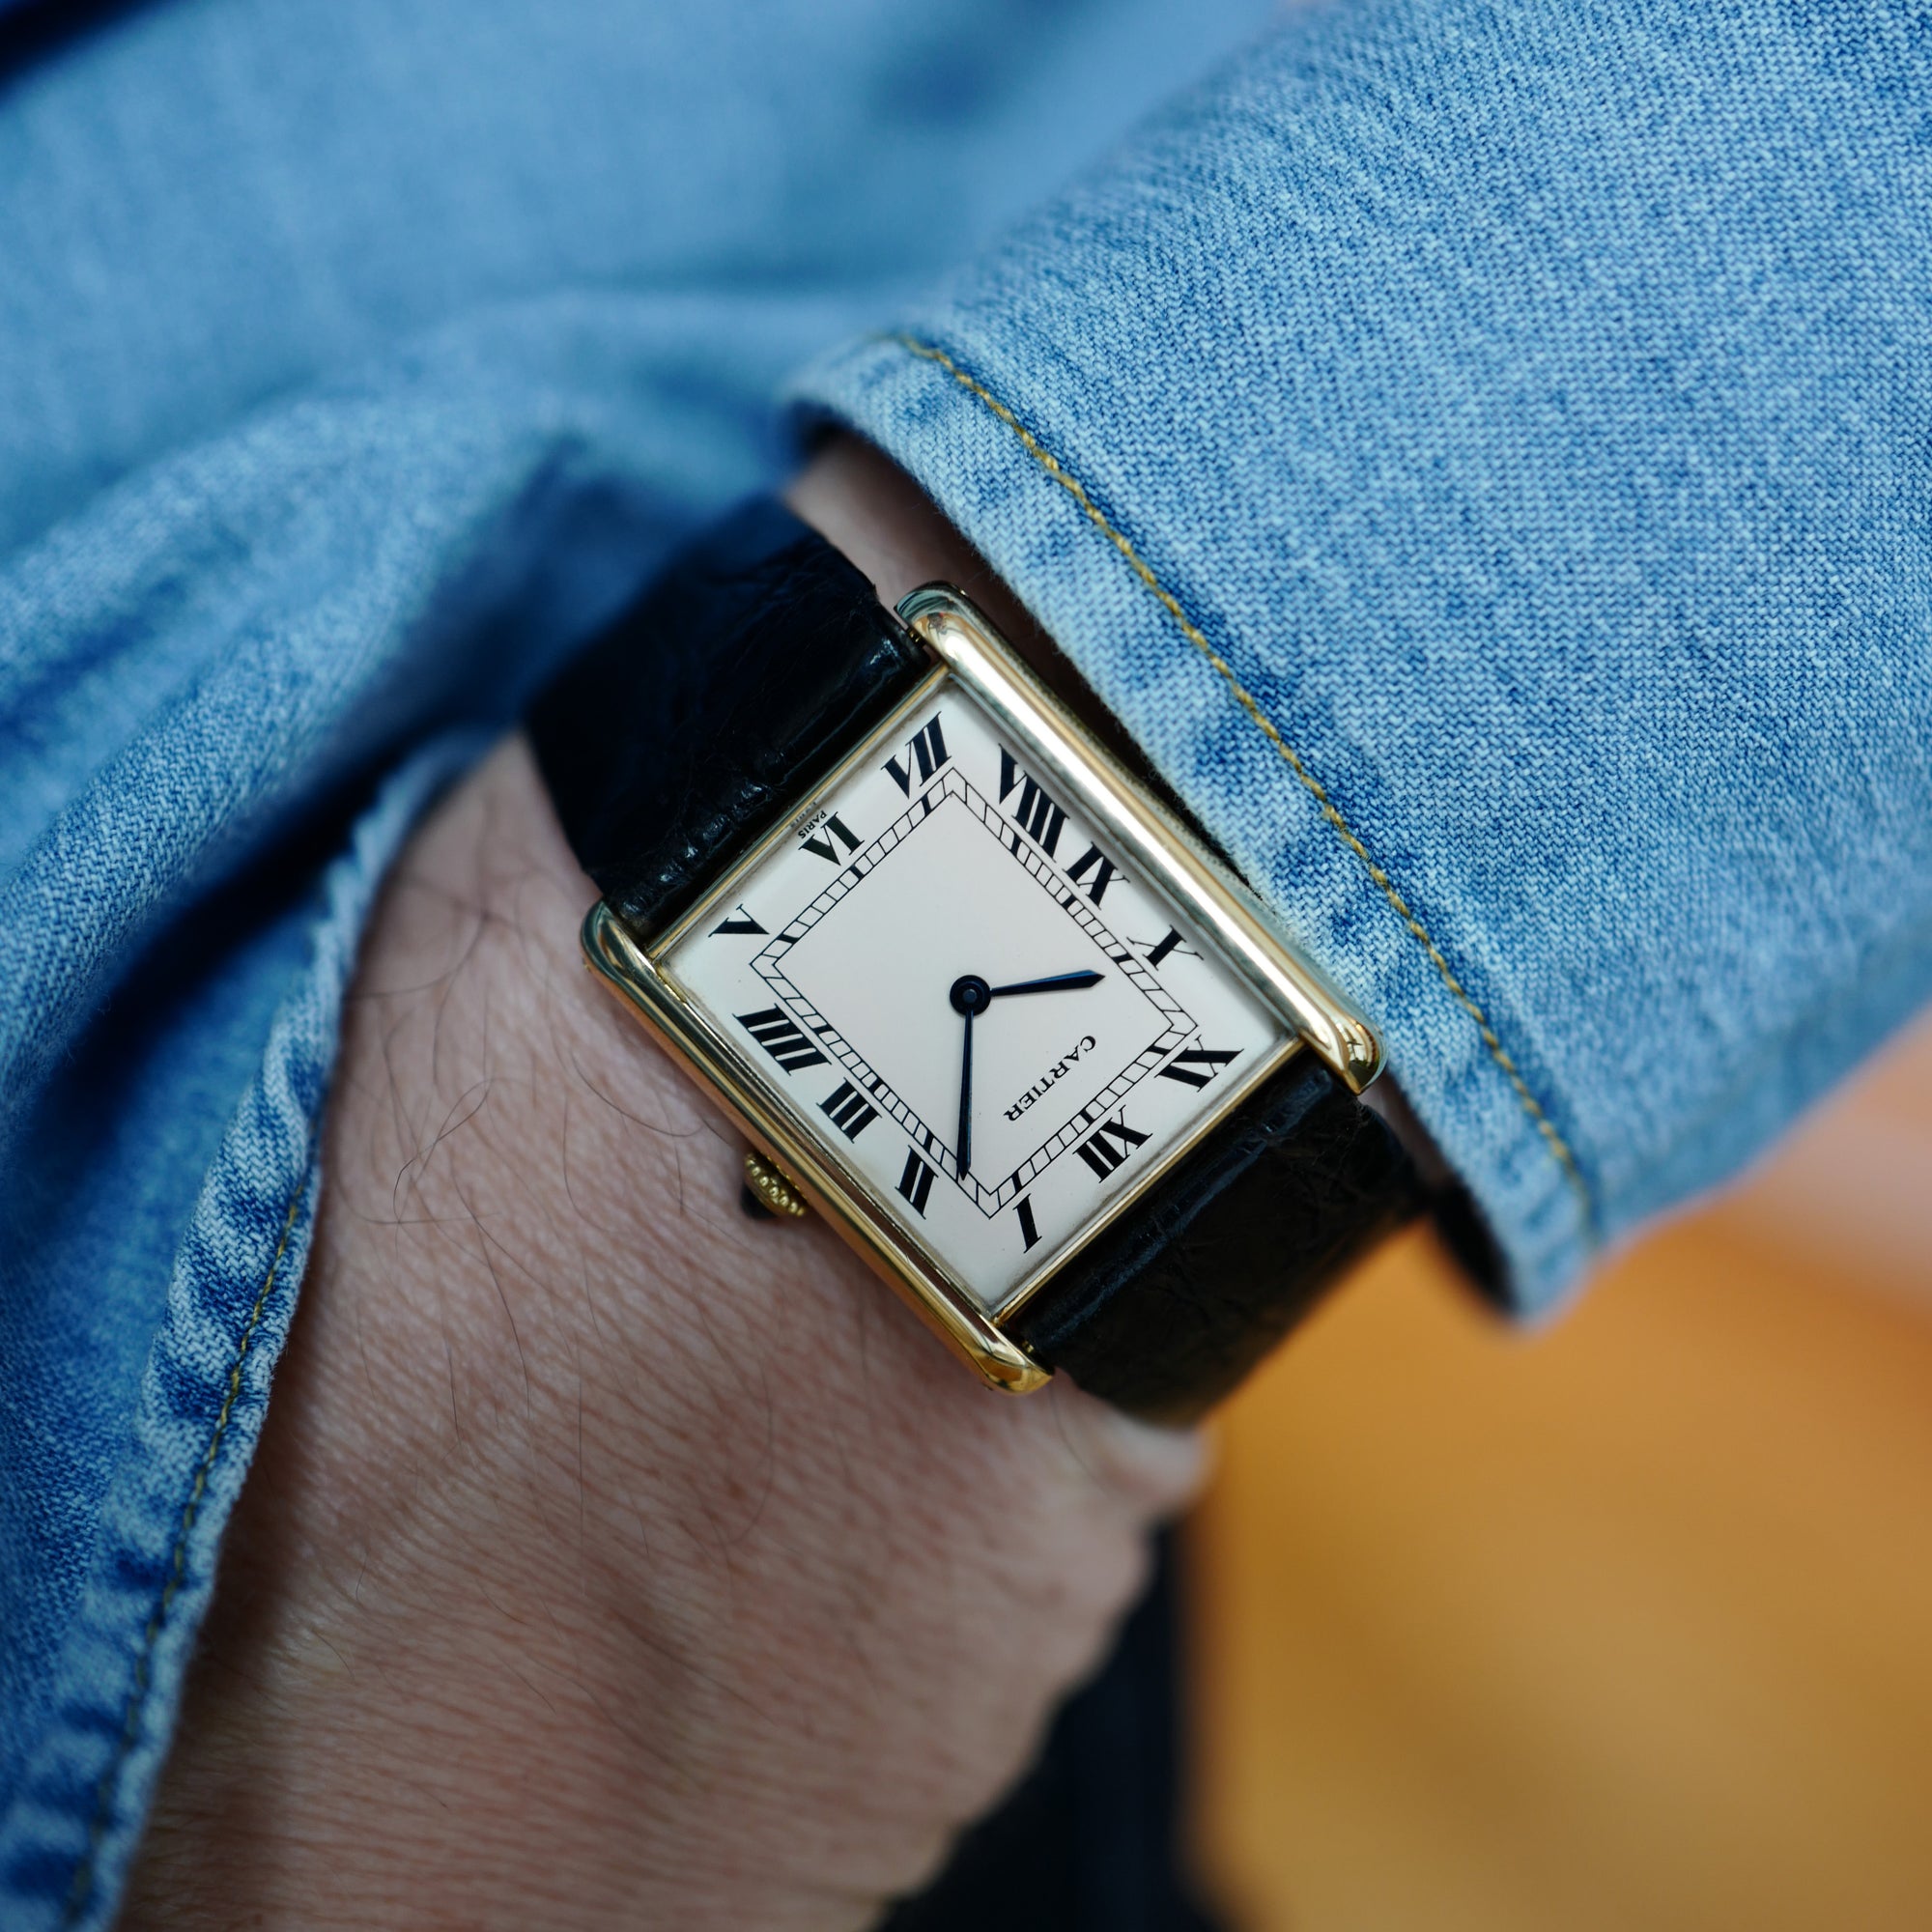 Cartier - Cartier Yellow Gold Tank Automatic Watch - The Keystone Watches